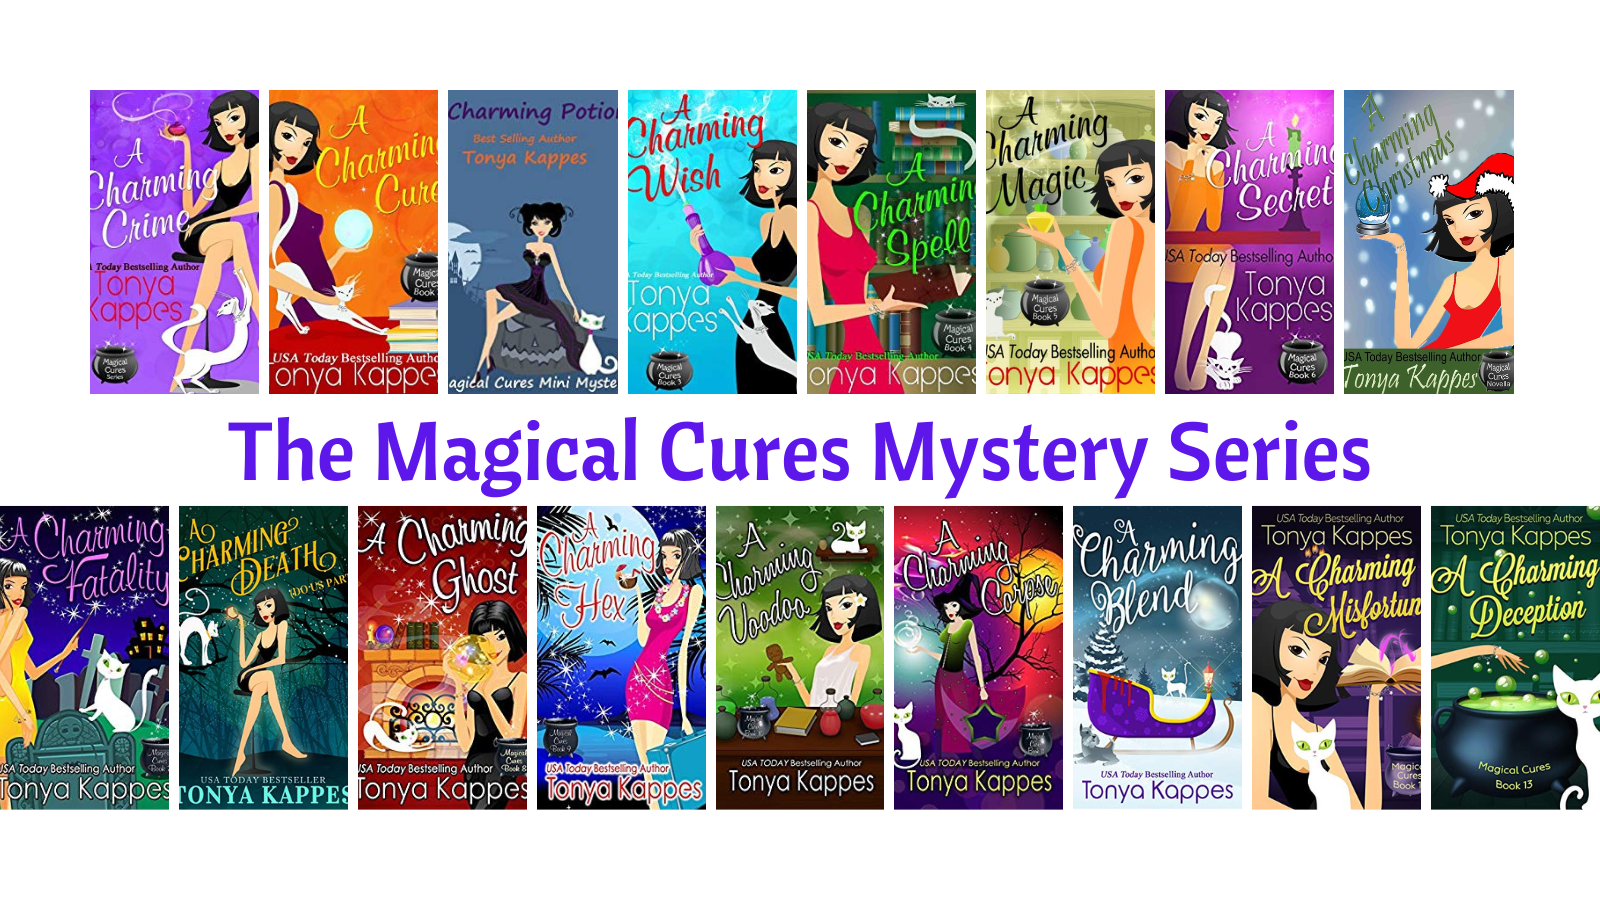 The Magical Cures Mystery Series